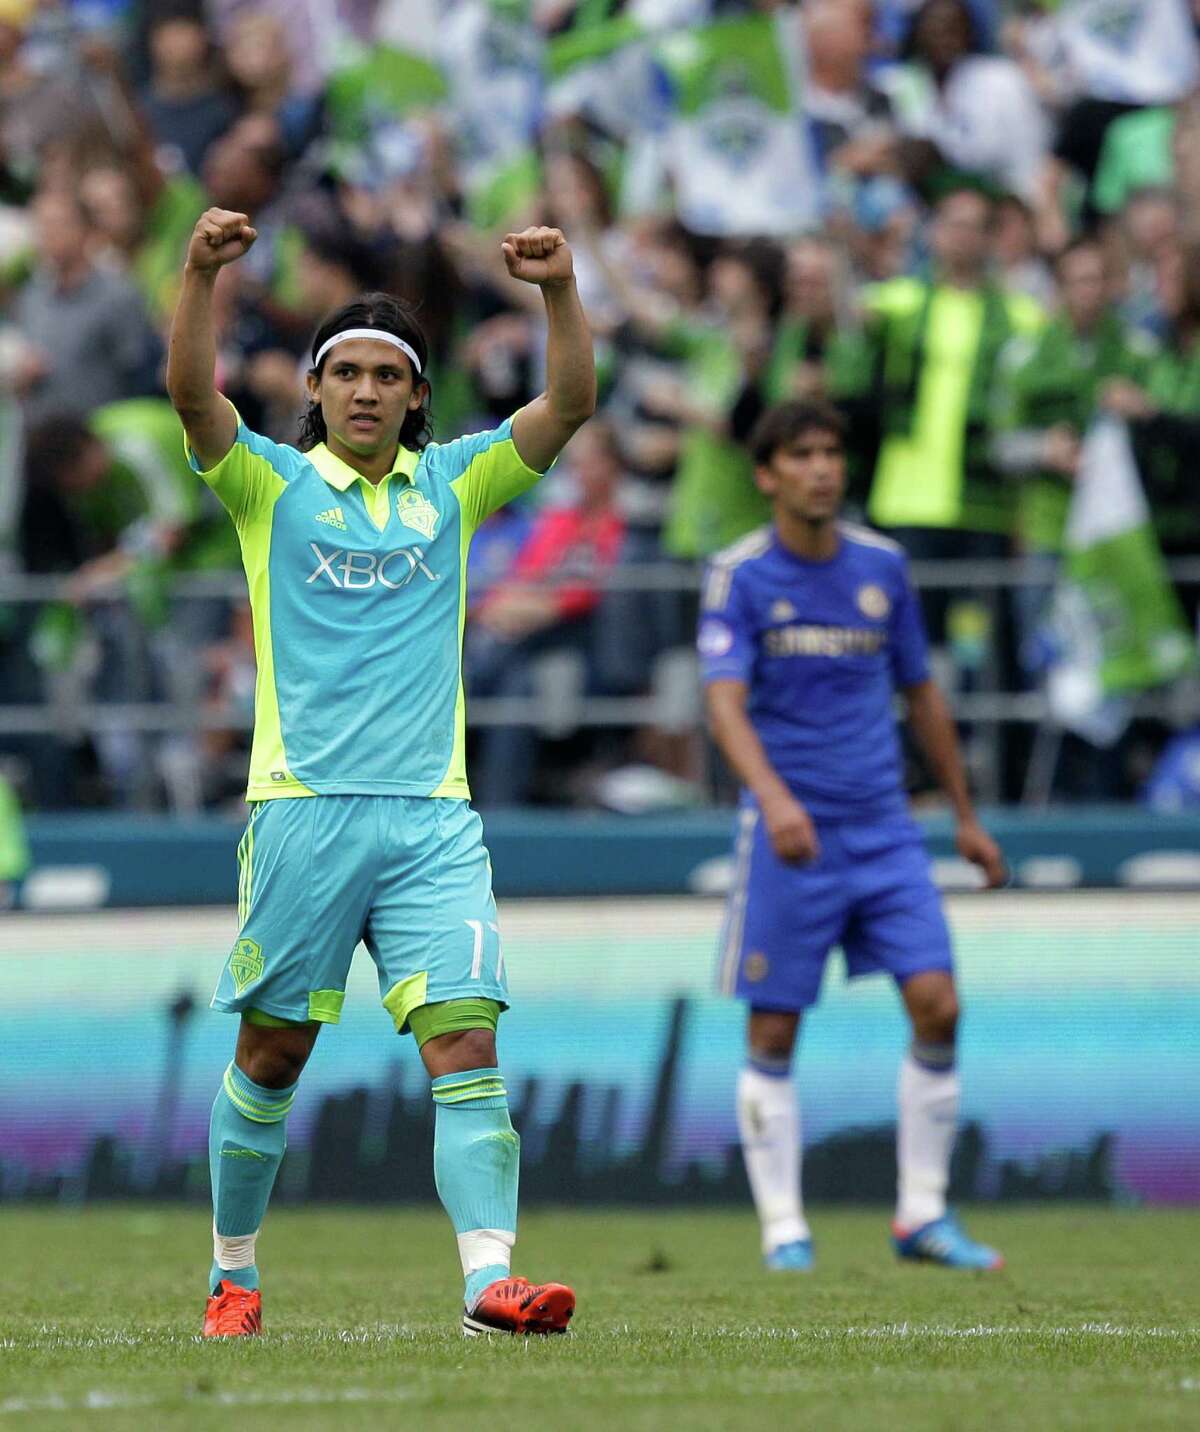 How about Sounders FC forward Fredy Montero?